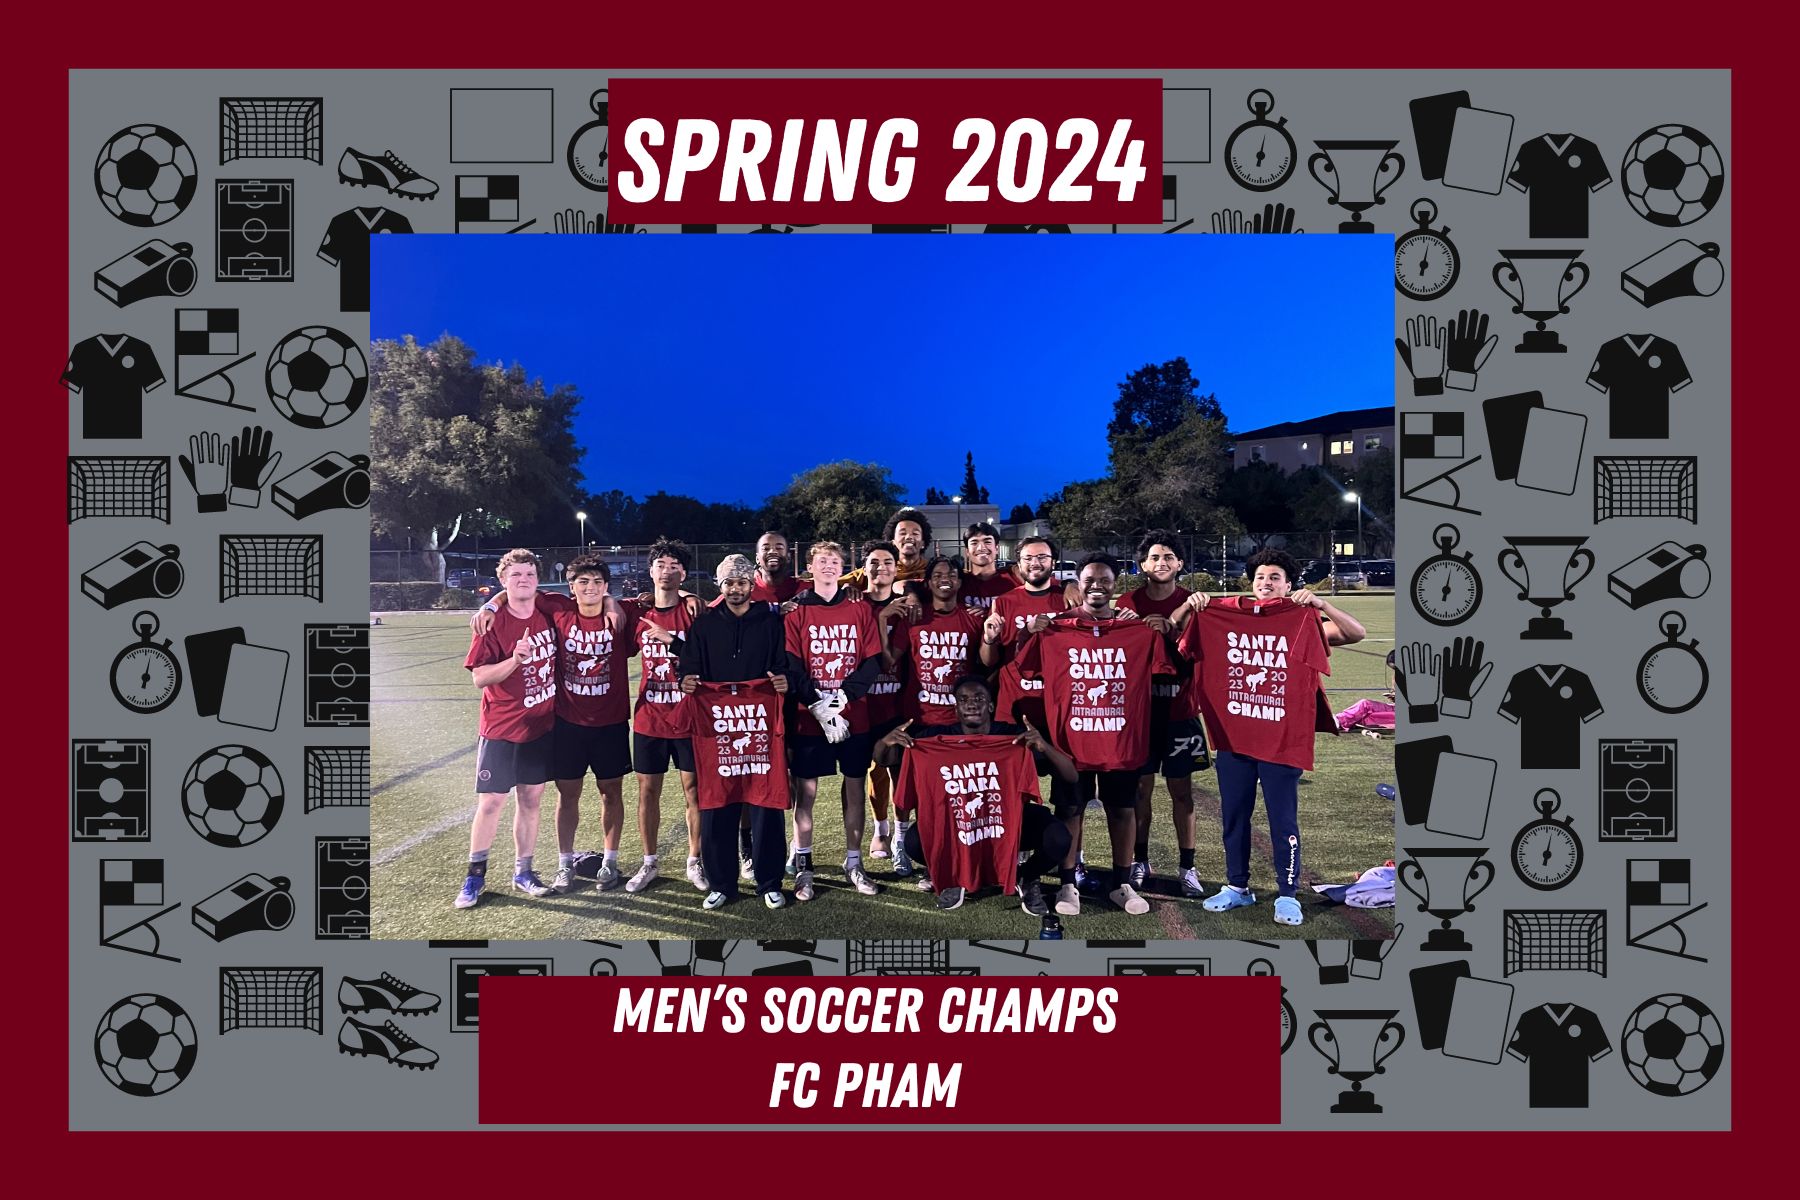 Photo of Men's Soccer Champions, FC Pham, posing with their IM Champ T-Shirts on Bellomy Field